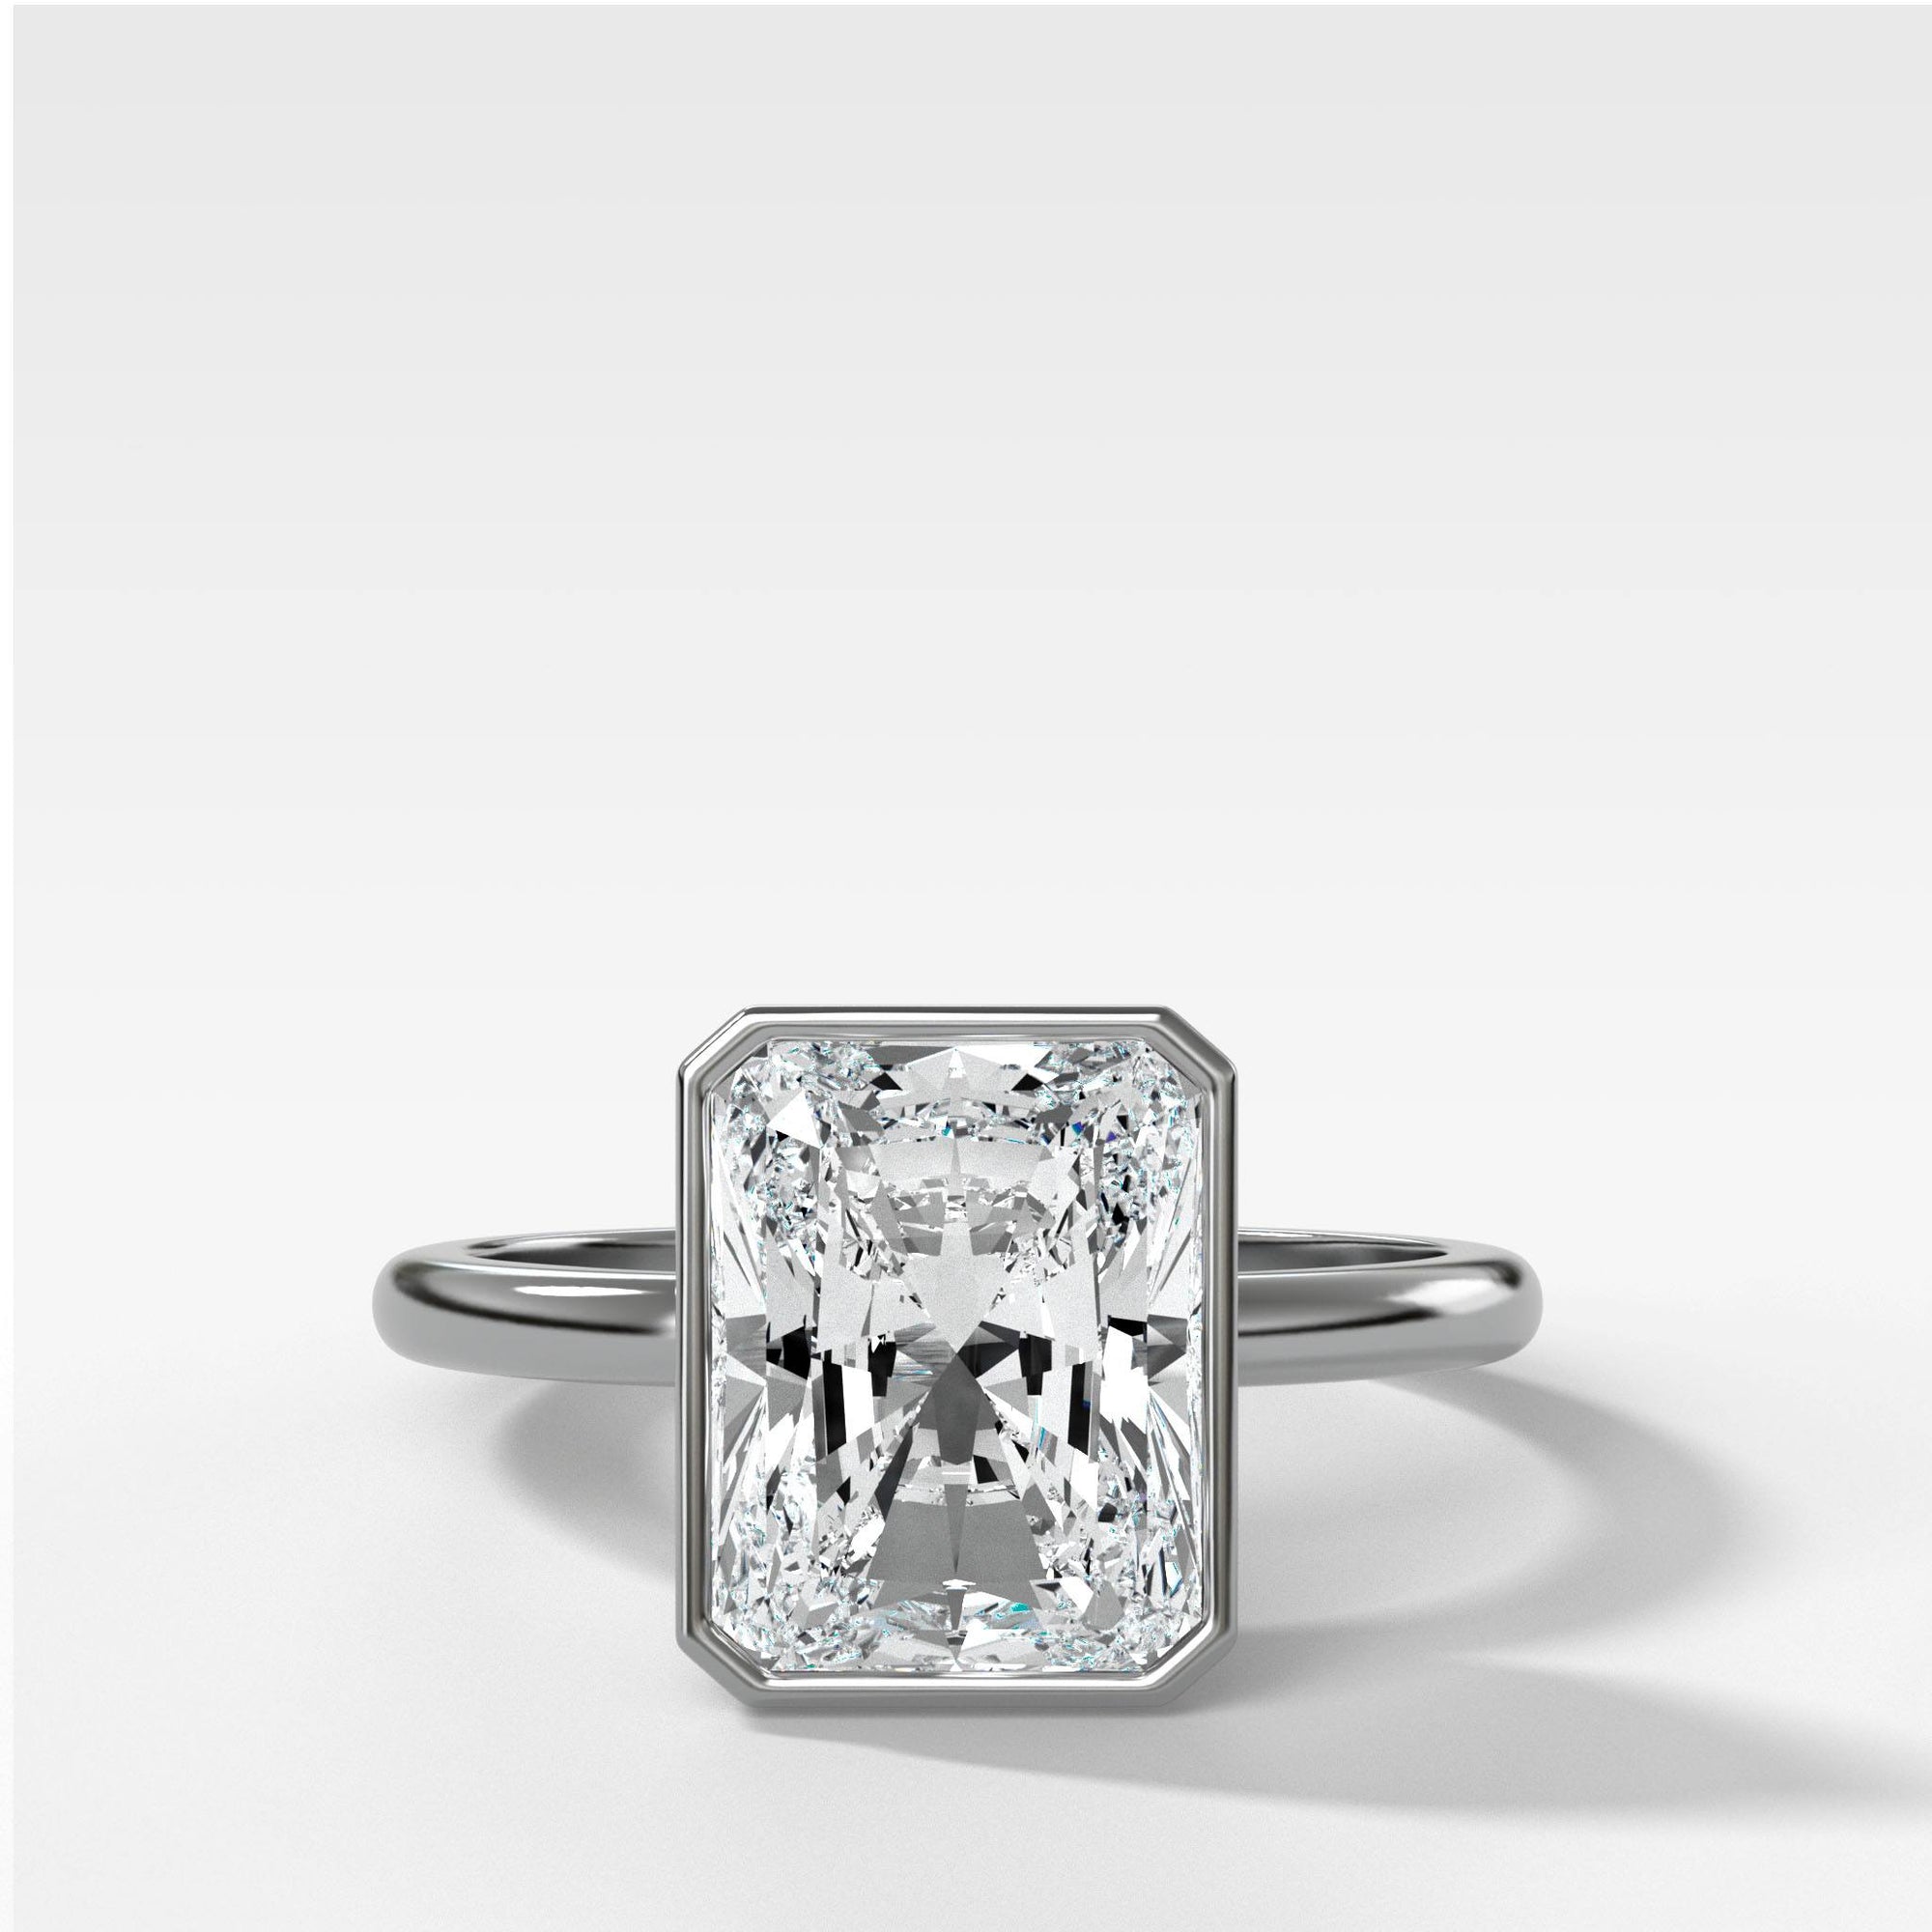 Bezel Penumbra Solitaire With Radiant Cut by Good Stone in Yellow Gold